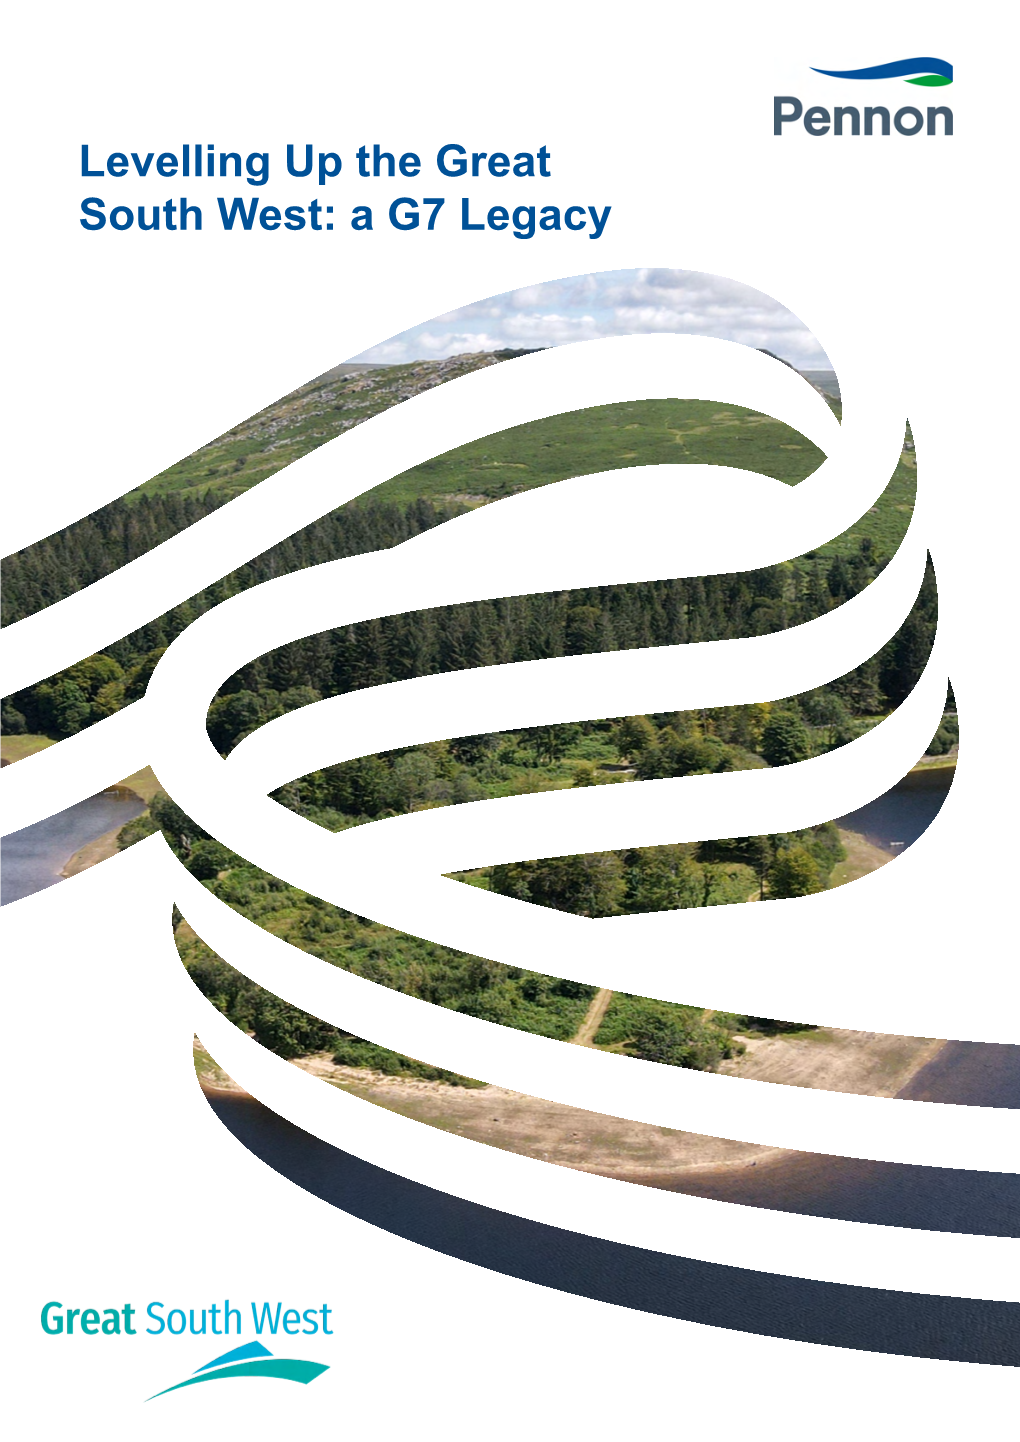 Levelling up the Great South West: a G7 Legacy Contents